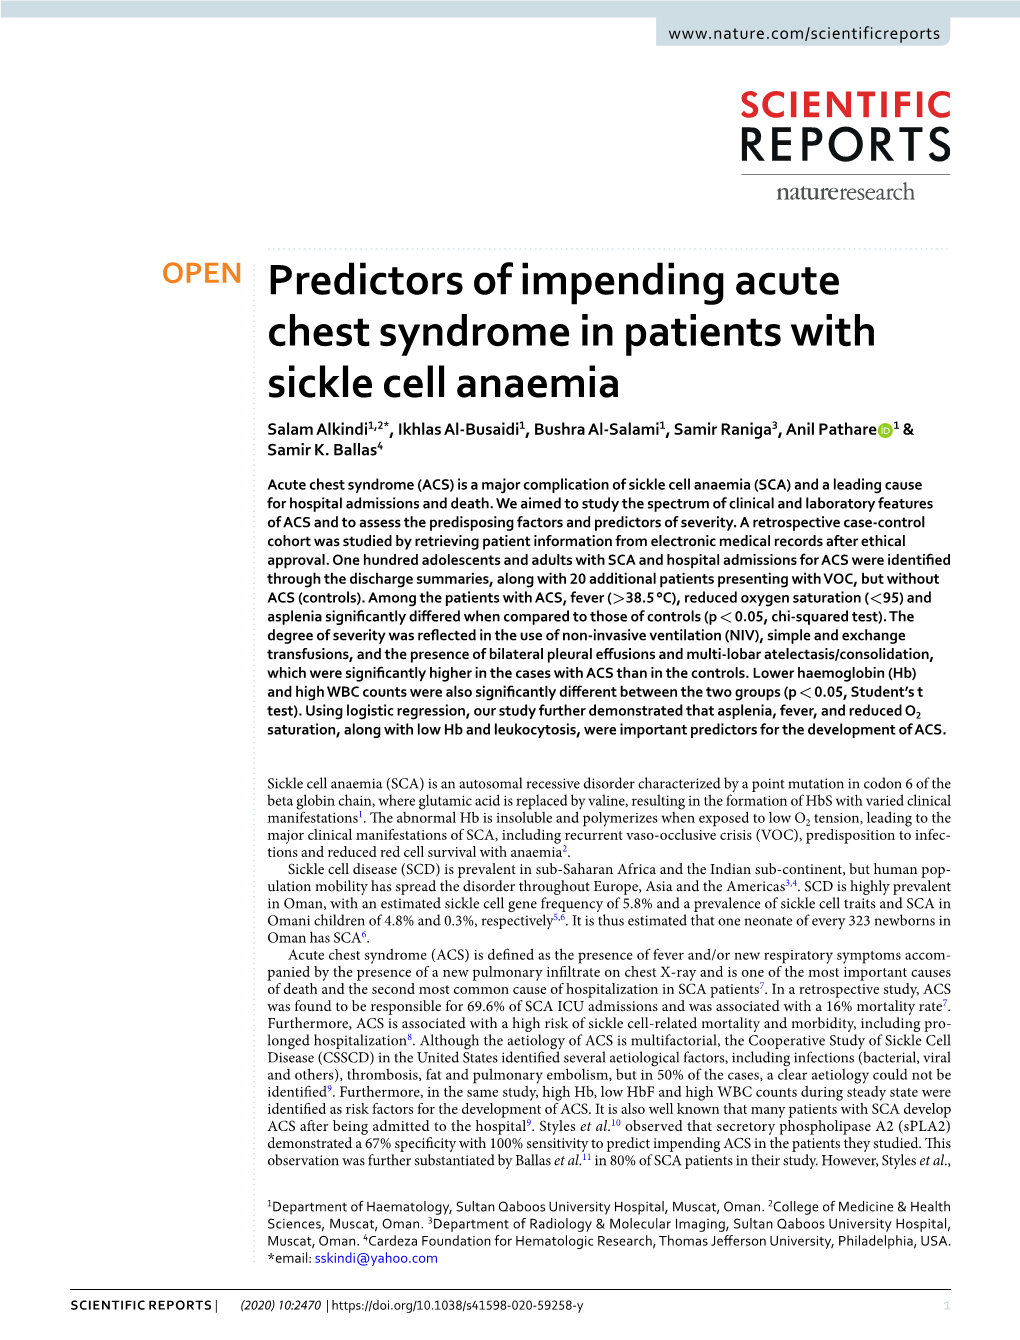 Predictors of Impending Acute Chest Syndrome in Patients with Sickle Cell